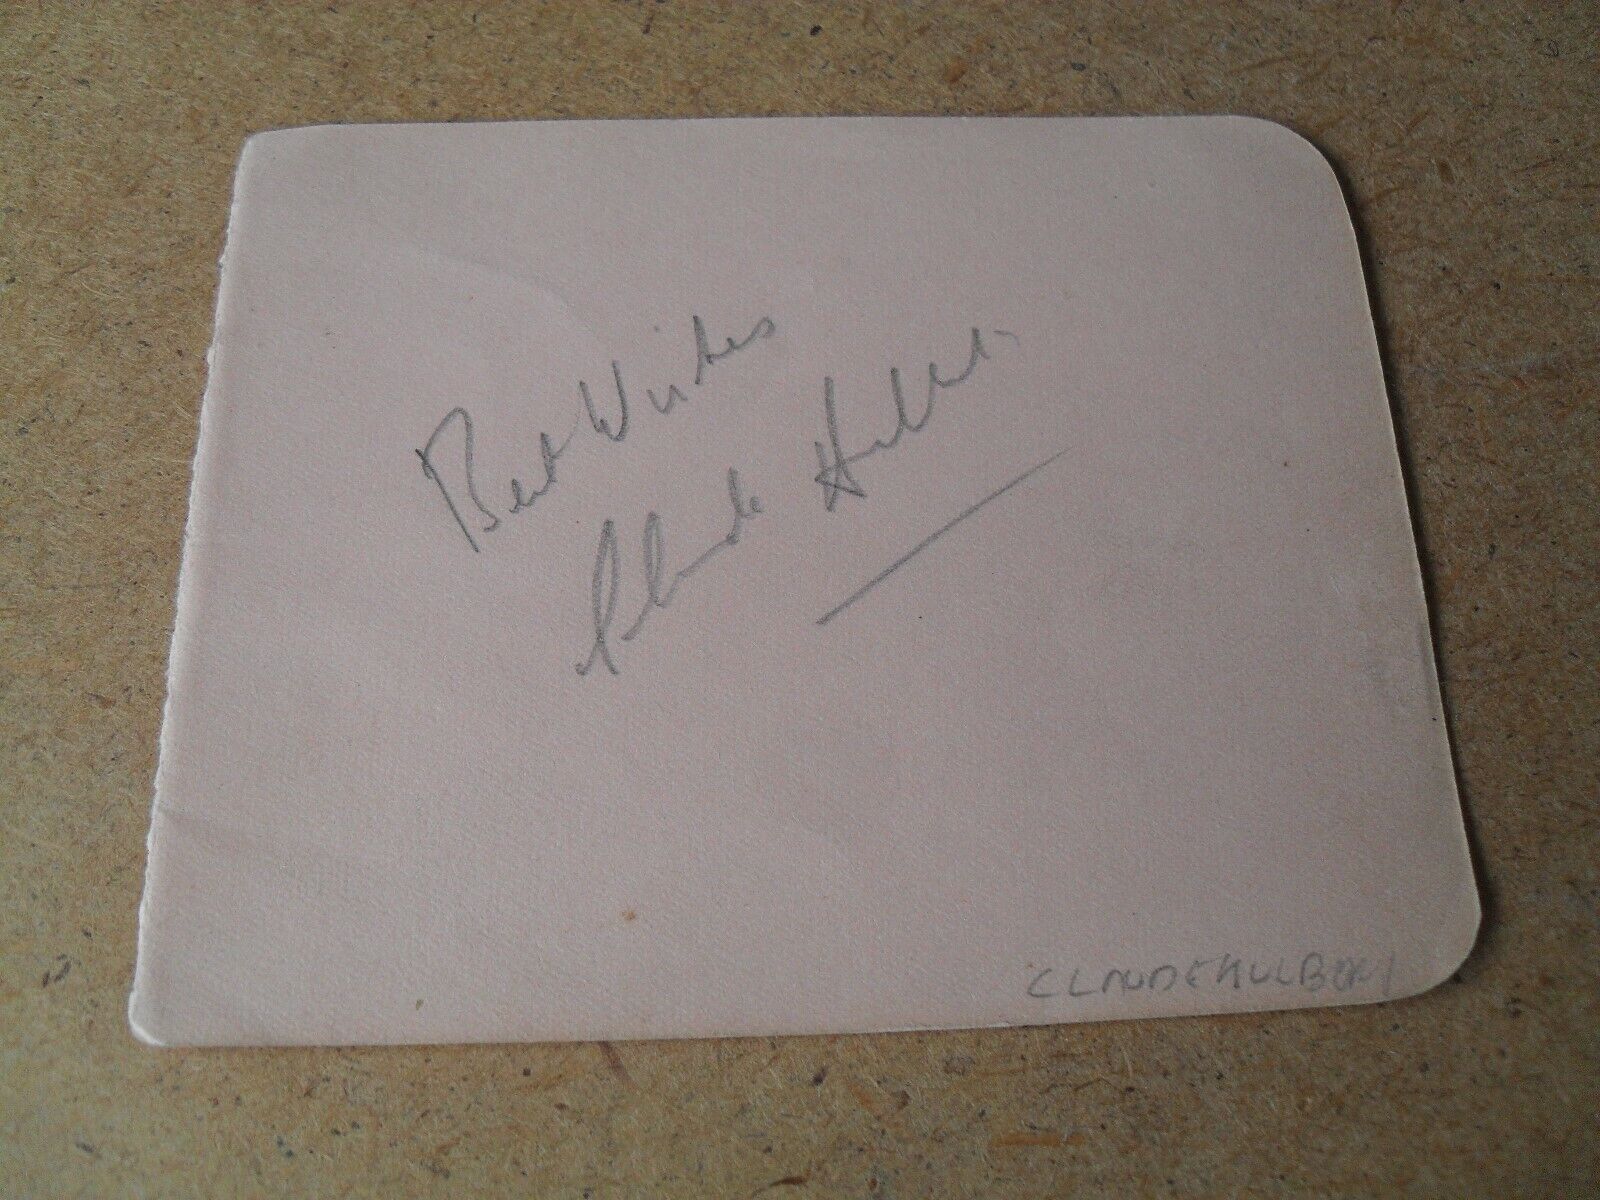 CLAUDE HULBERT - Signed autograph book page COMIC FILM ACTOR WILL HAY